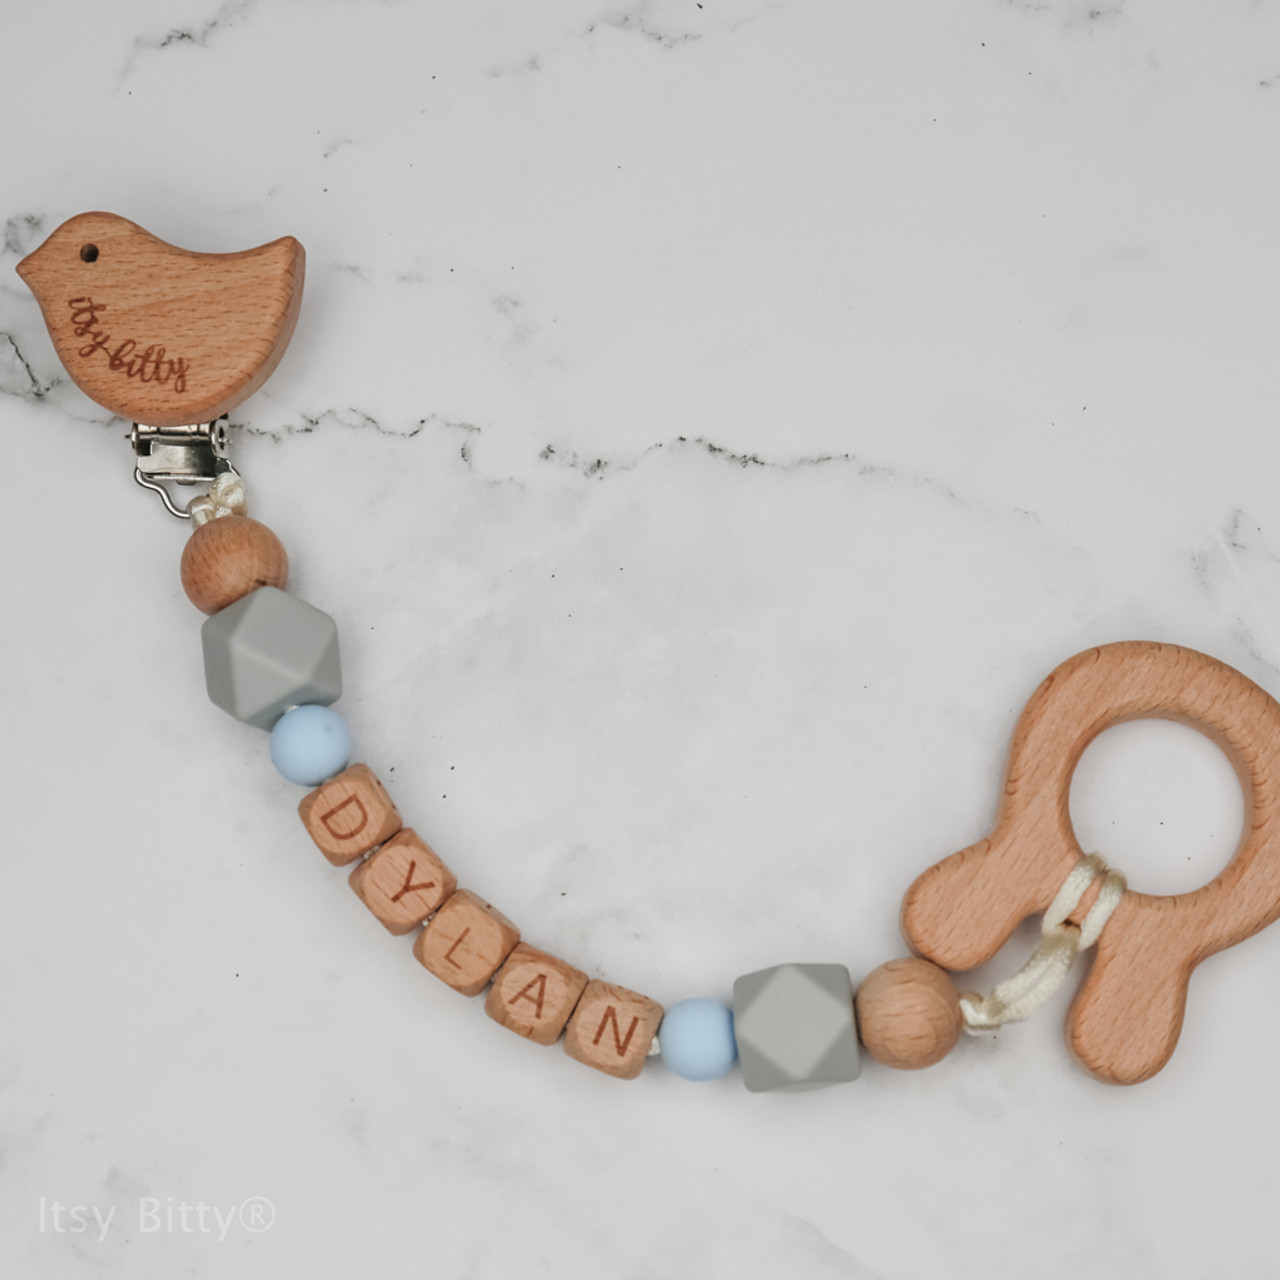 Baby pacifier clip Chain - Blue